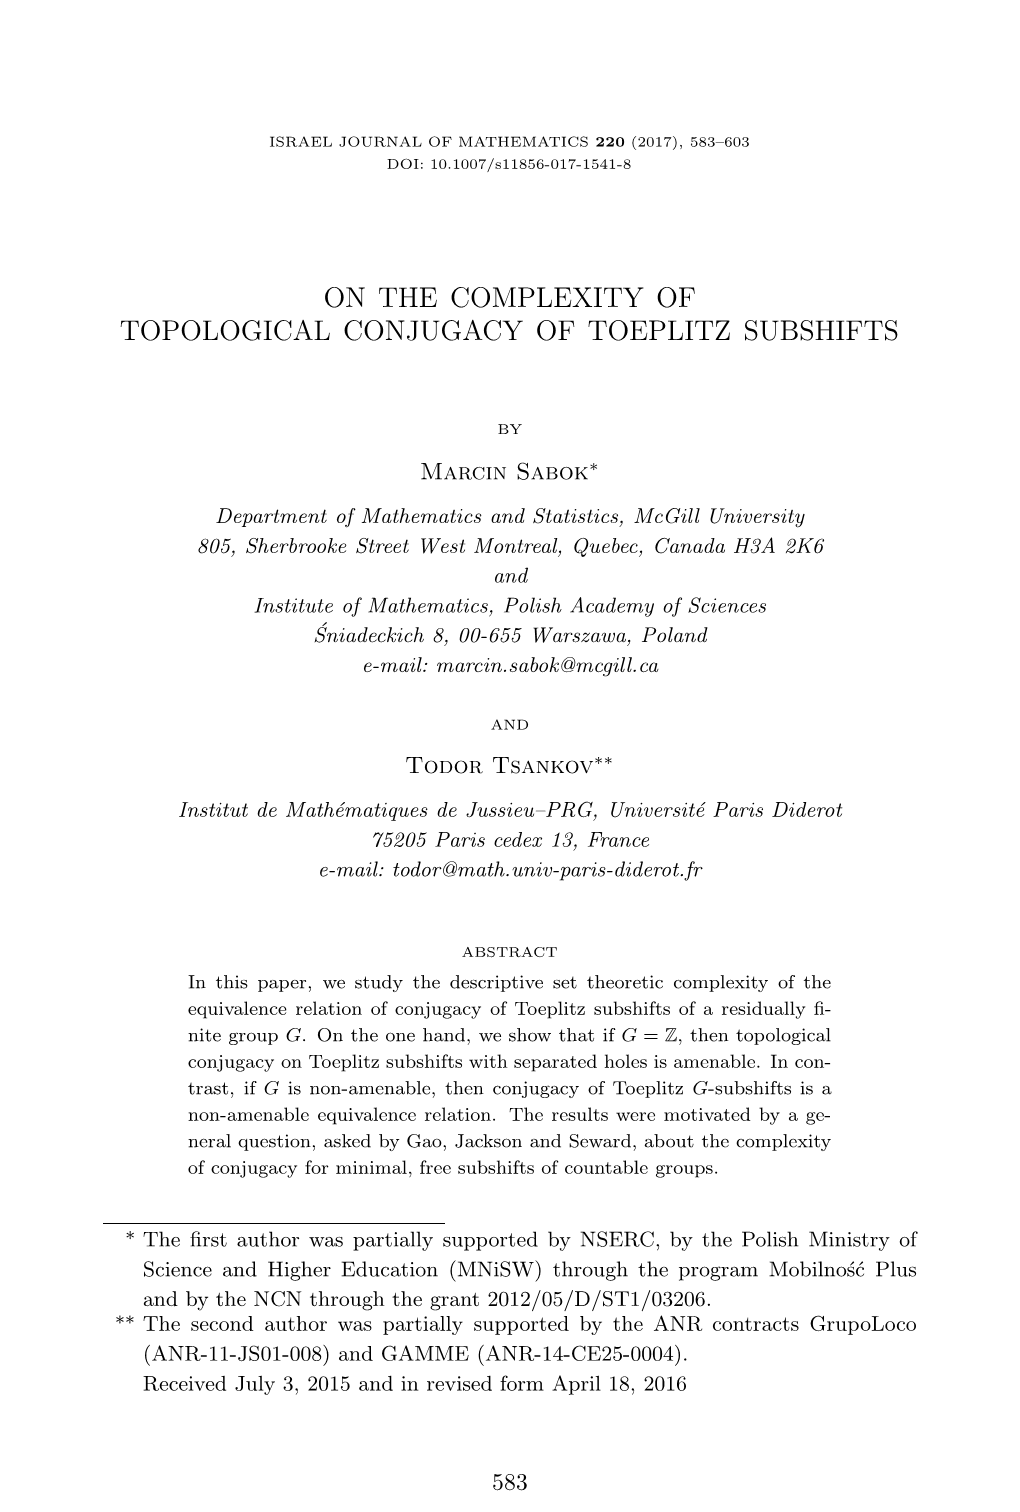 On the Complexity of Topological Conjugacy of Toeplitz Subshifts